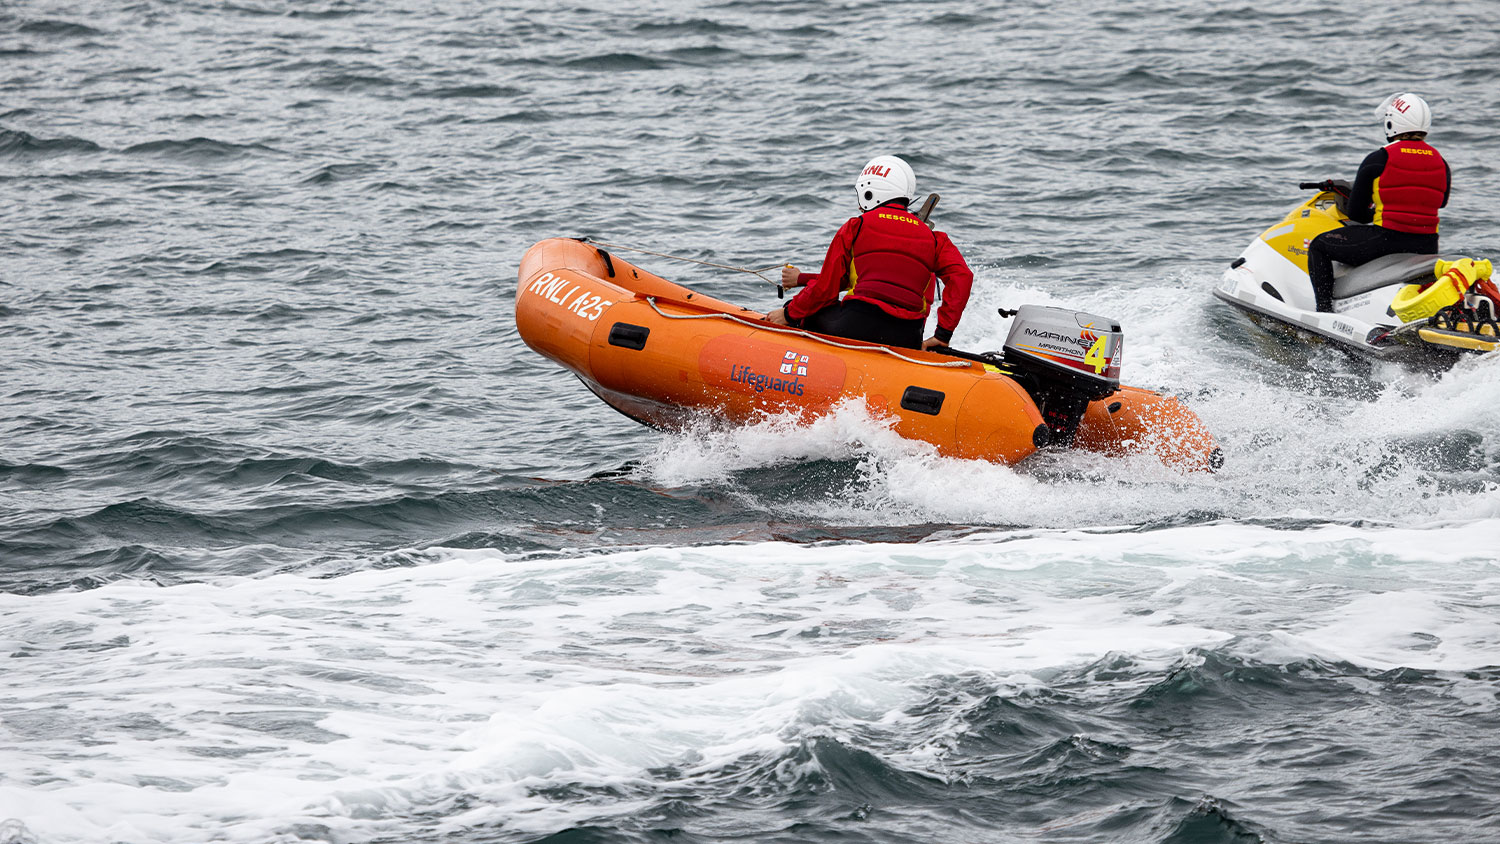 RNLI Lifeguards heading to rescue on a rib and jet powered watercraft